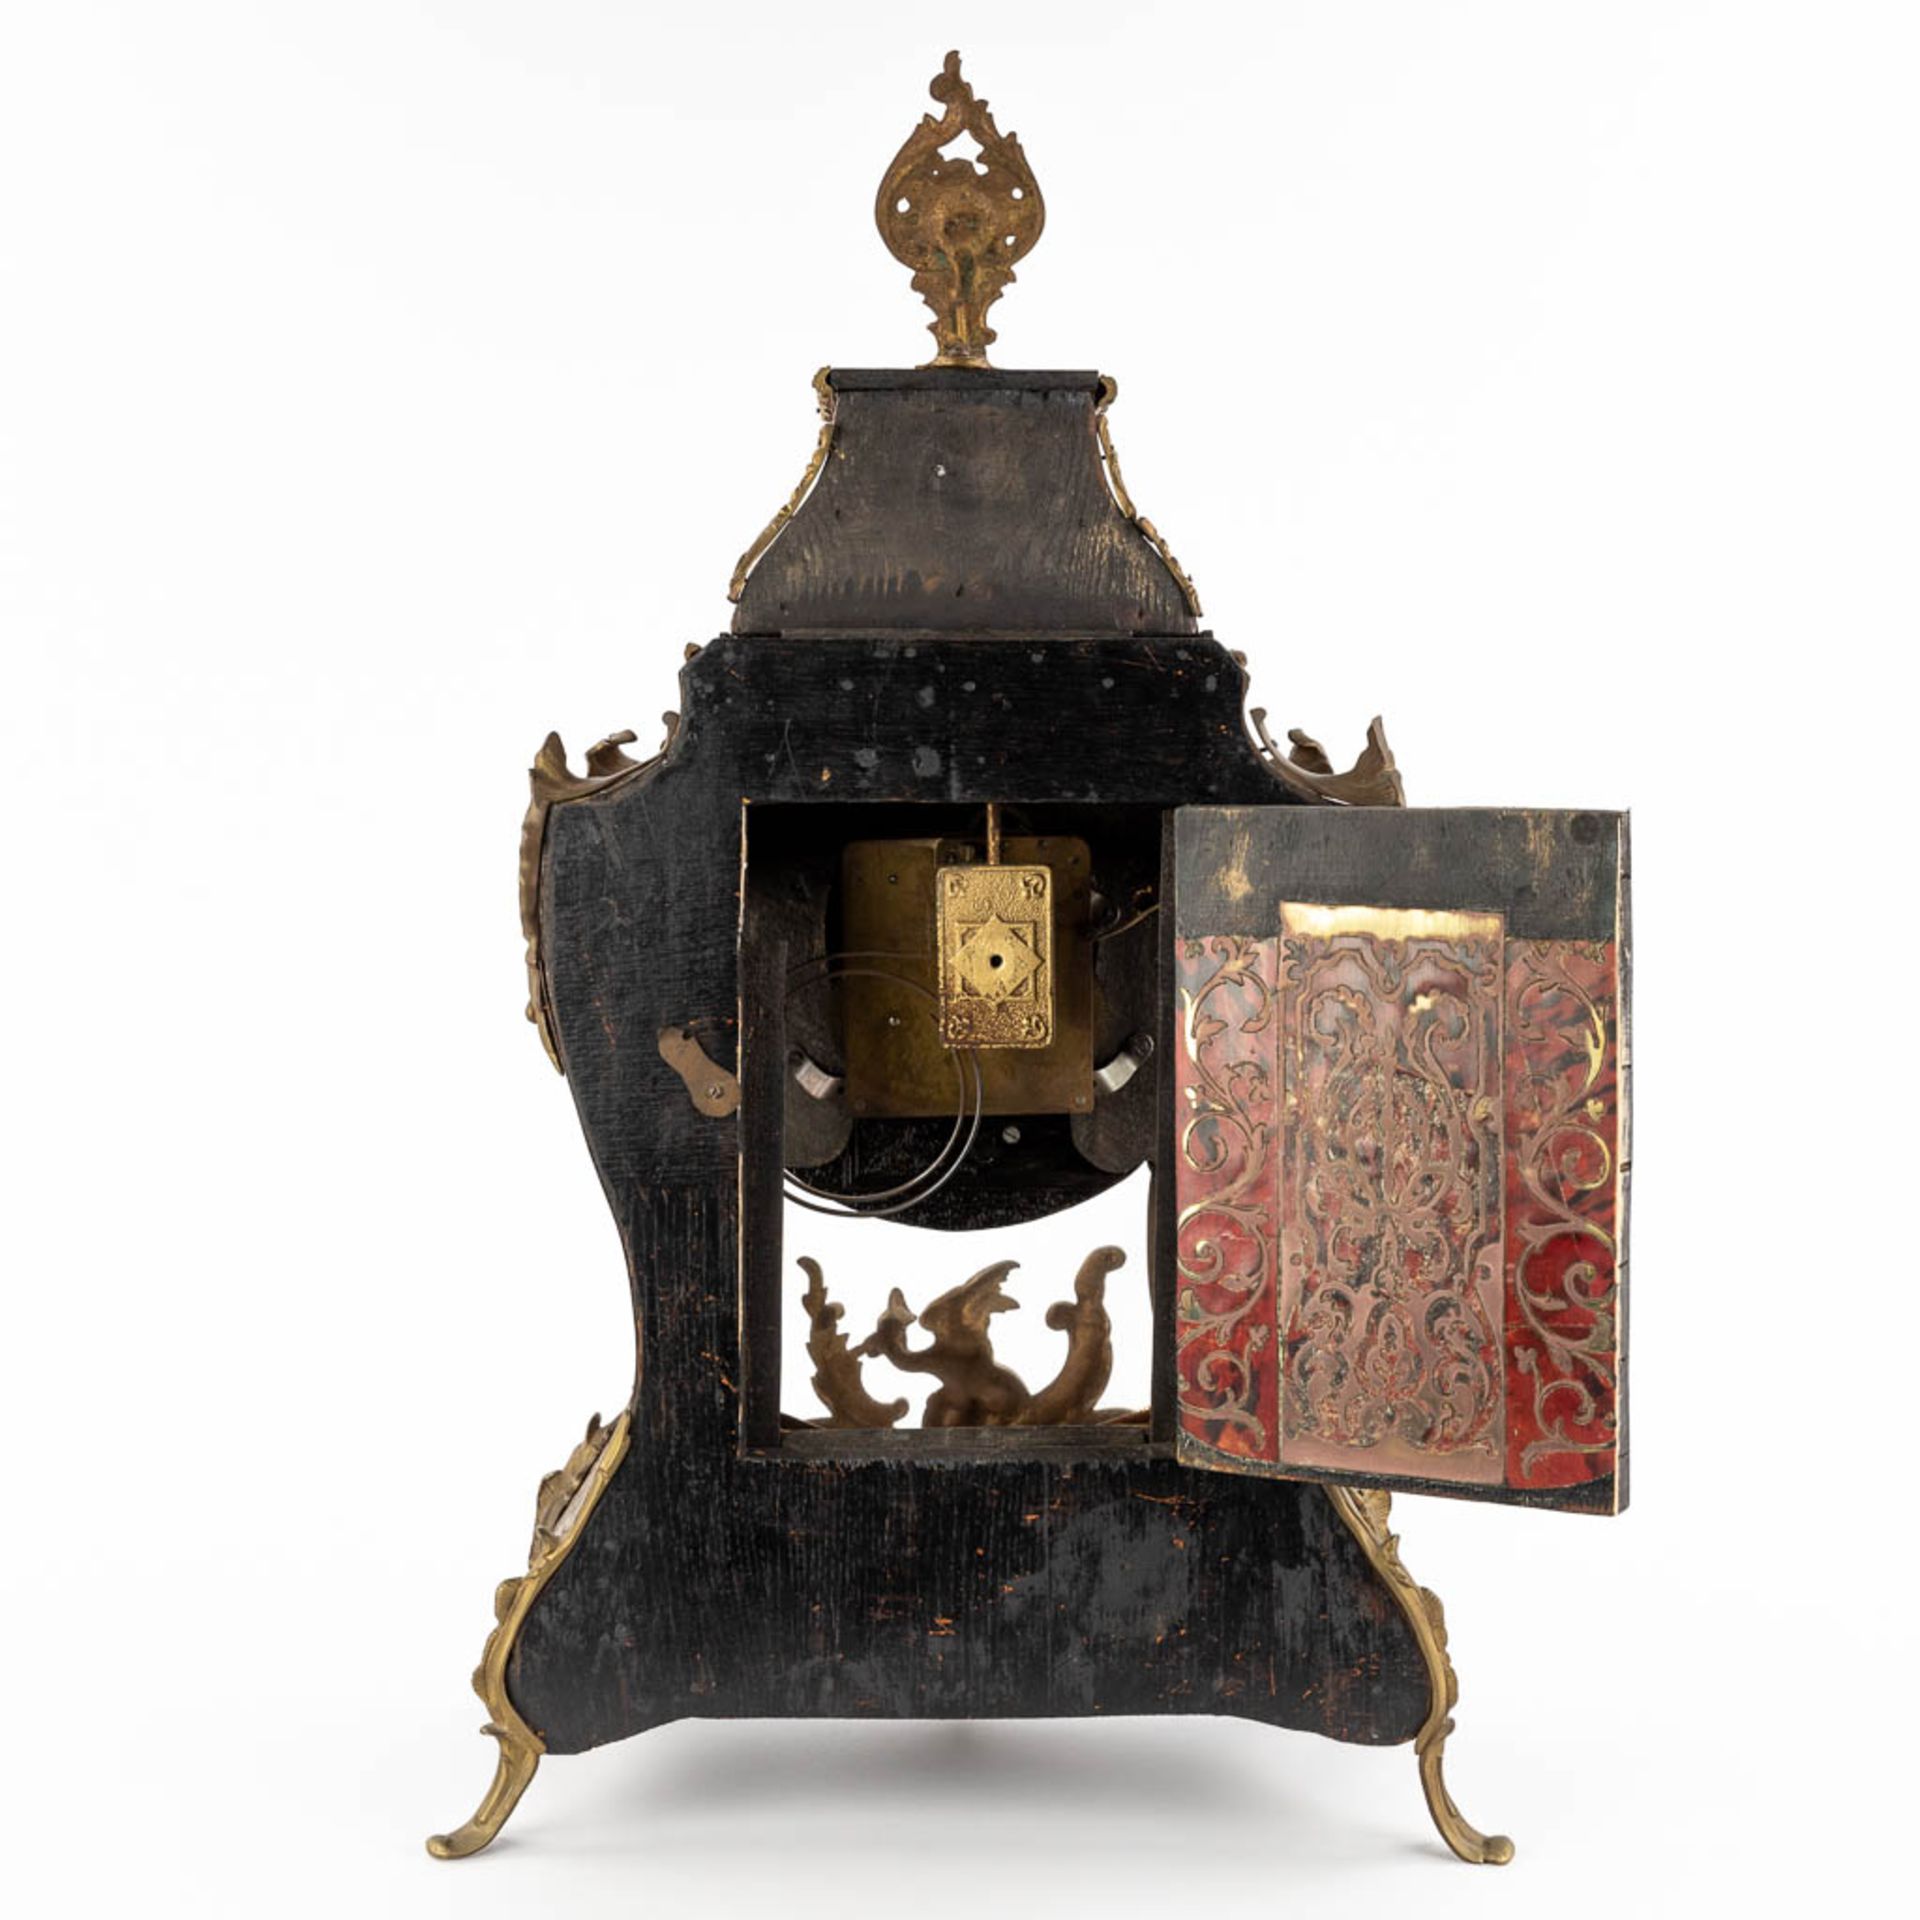 An antique mantle clock, tortoiseshell and copper inlay, early 20th C. (D:18 x W:38 x H:65 cm) - Bild 8 aus 15